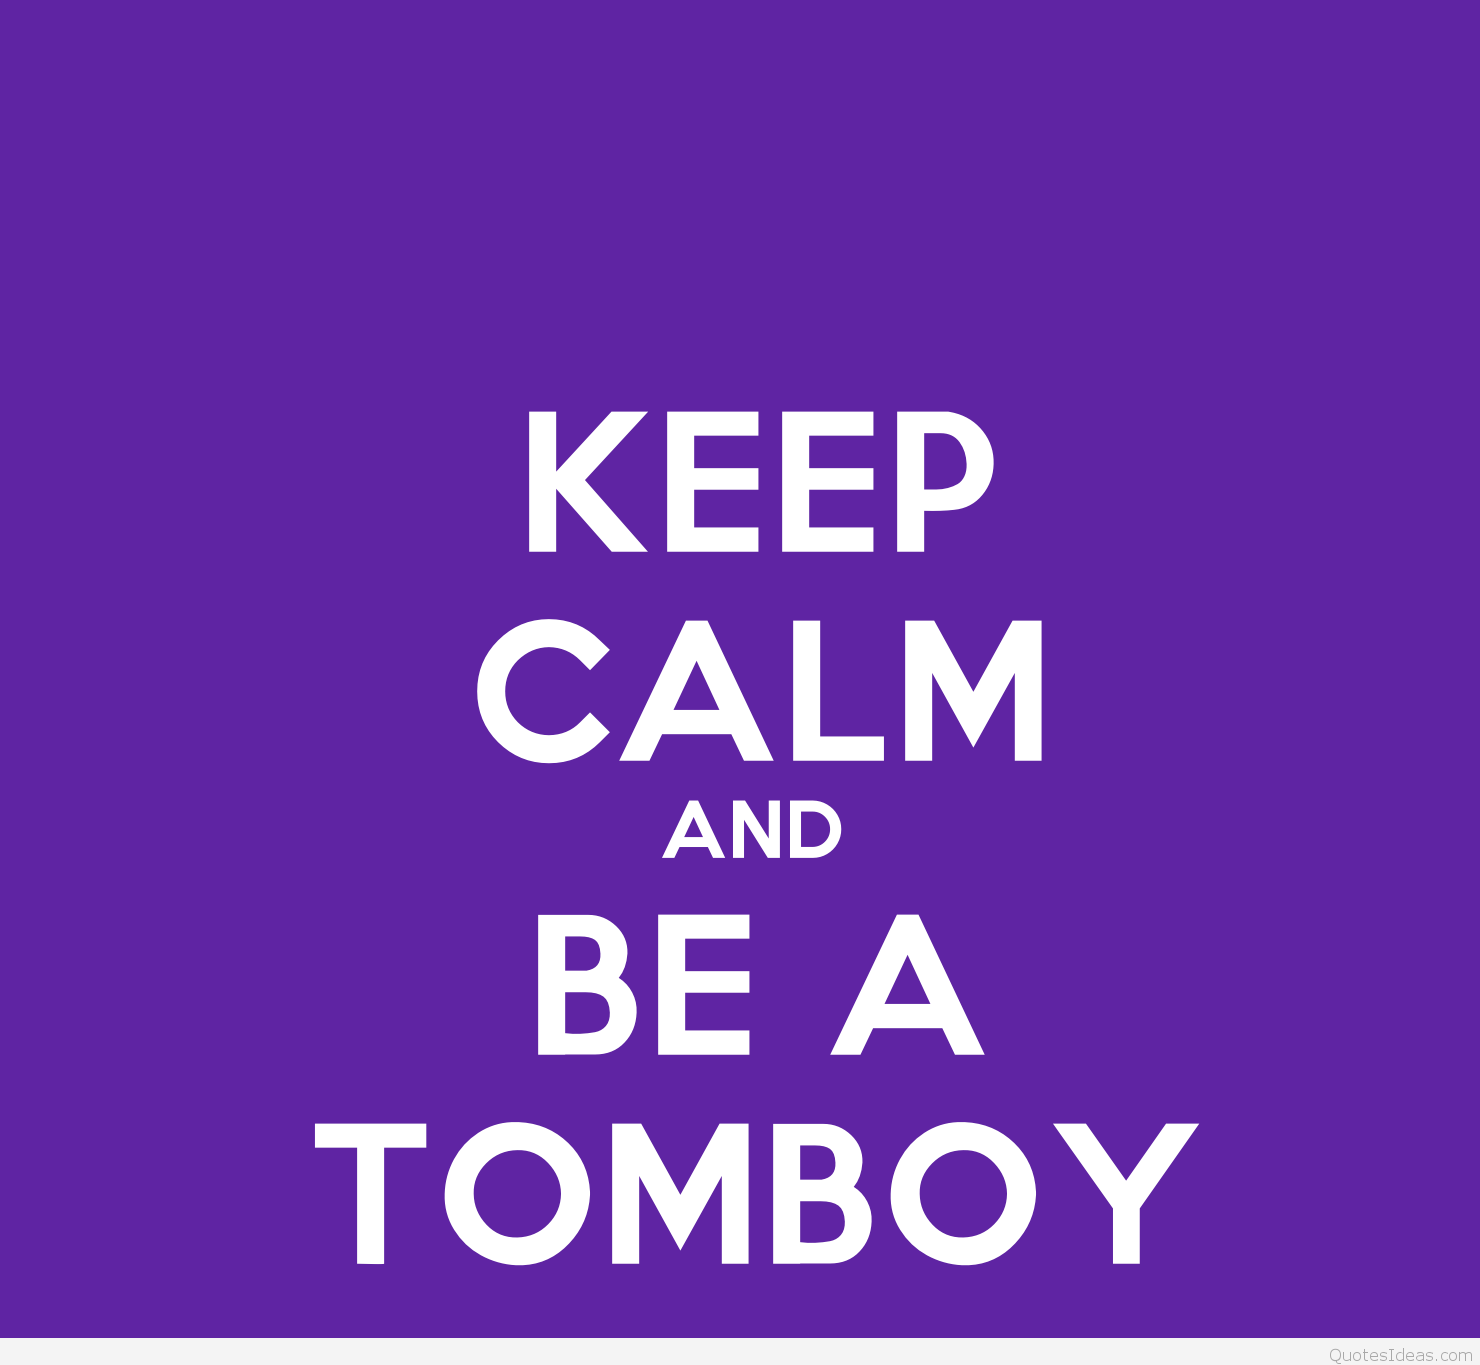 HD Tomboy Wallpaper. Download Free. Tomboy quotes, Tomboy, Quotes